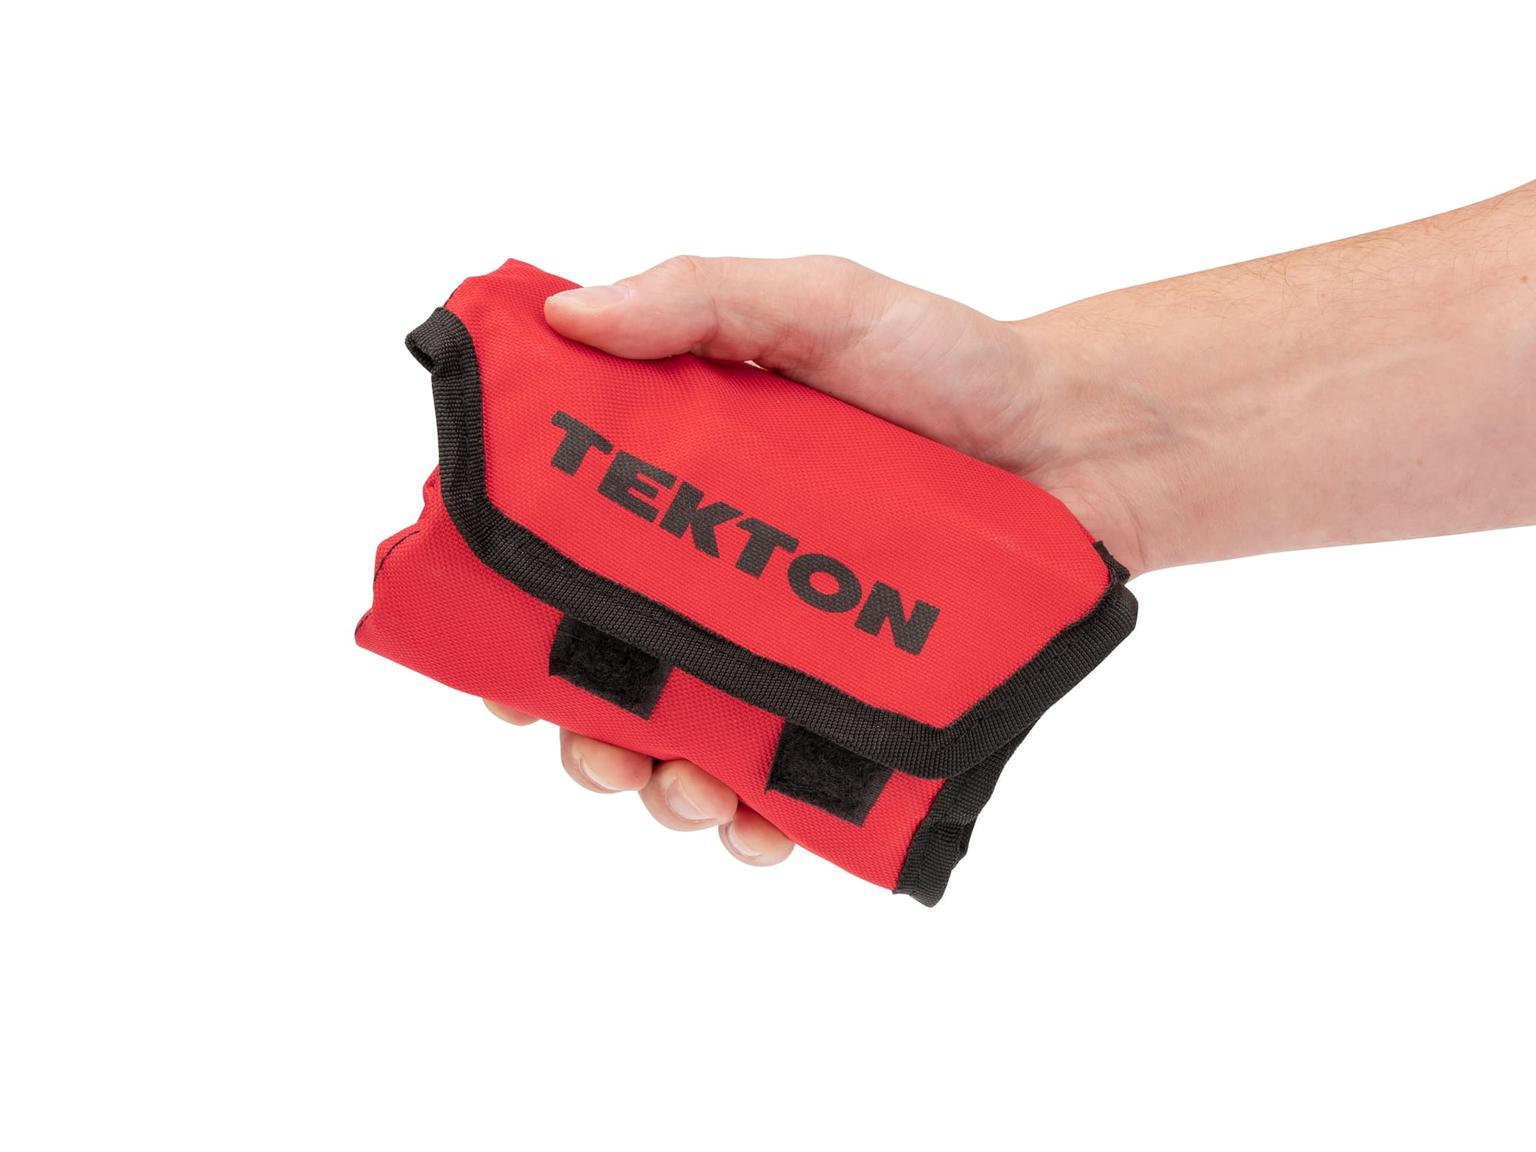 TEKTON ORG27409-T 9-Tool Combination Wrench Pouch (8-16 mm)